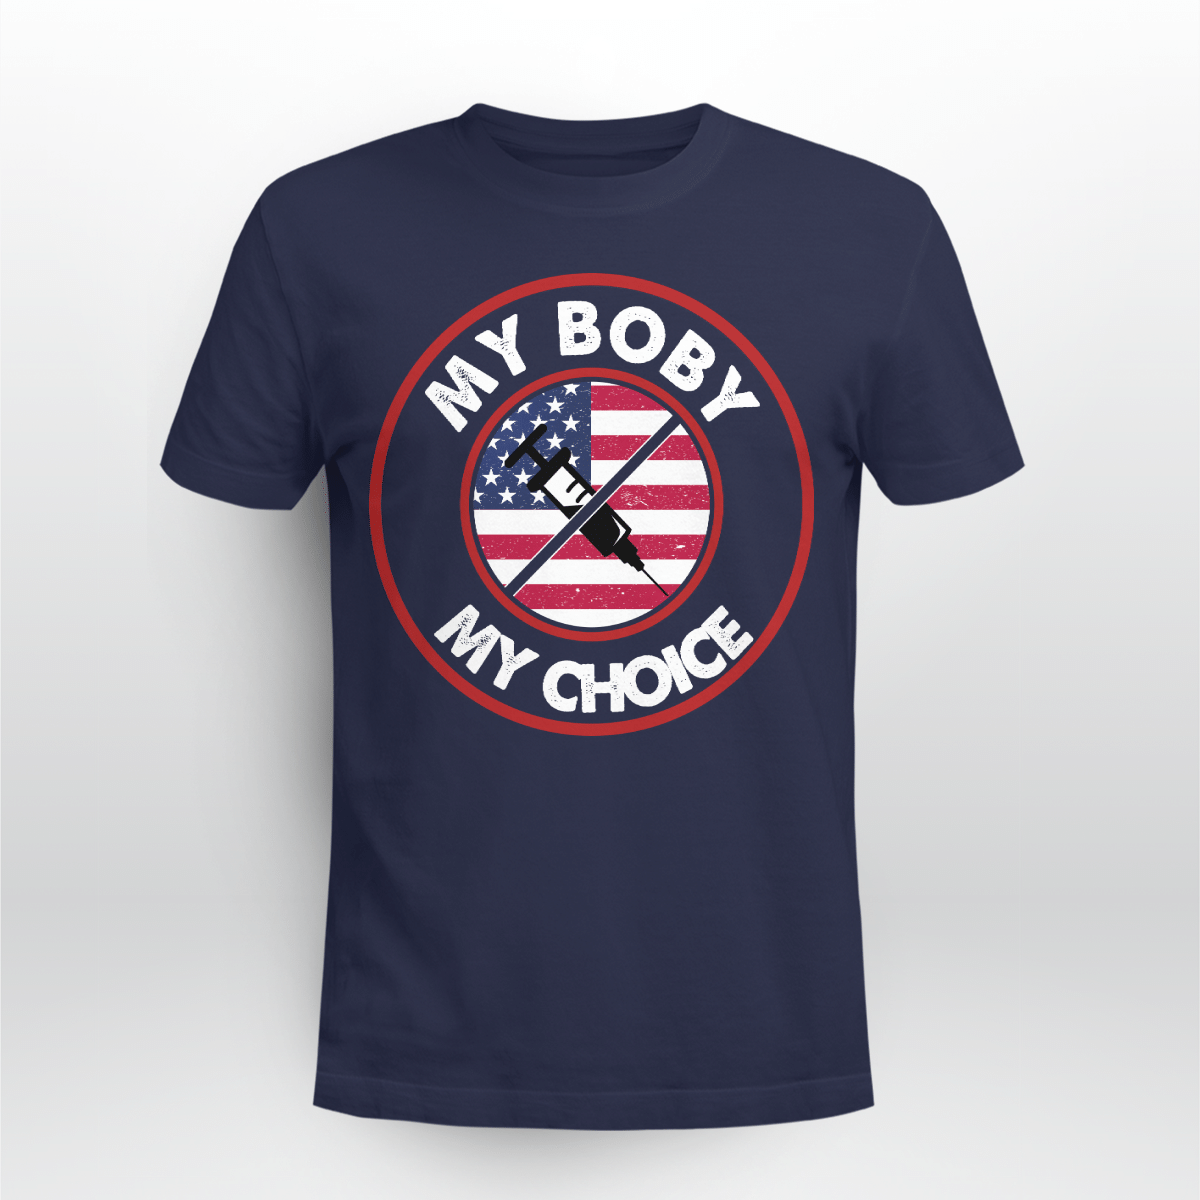 My Body My Choice Anti-Vaccination No Forced Vaccines Shirt Style: Unisex T-shirt, Color: Navy